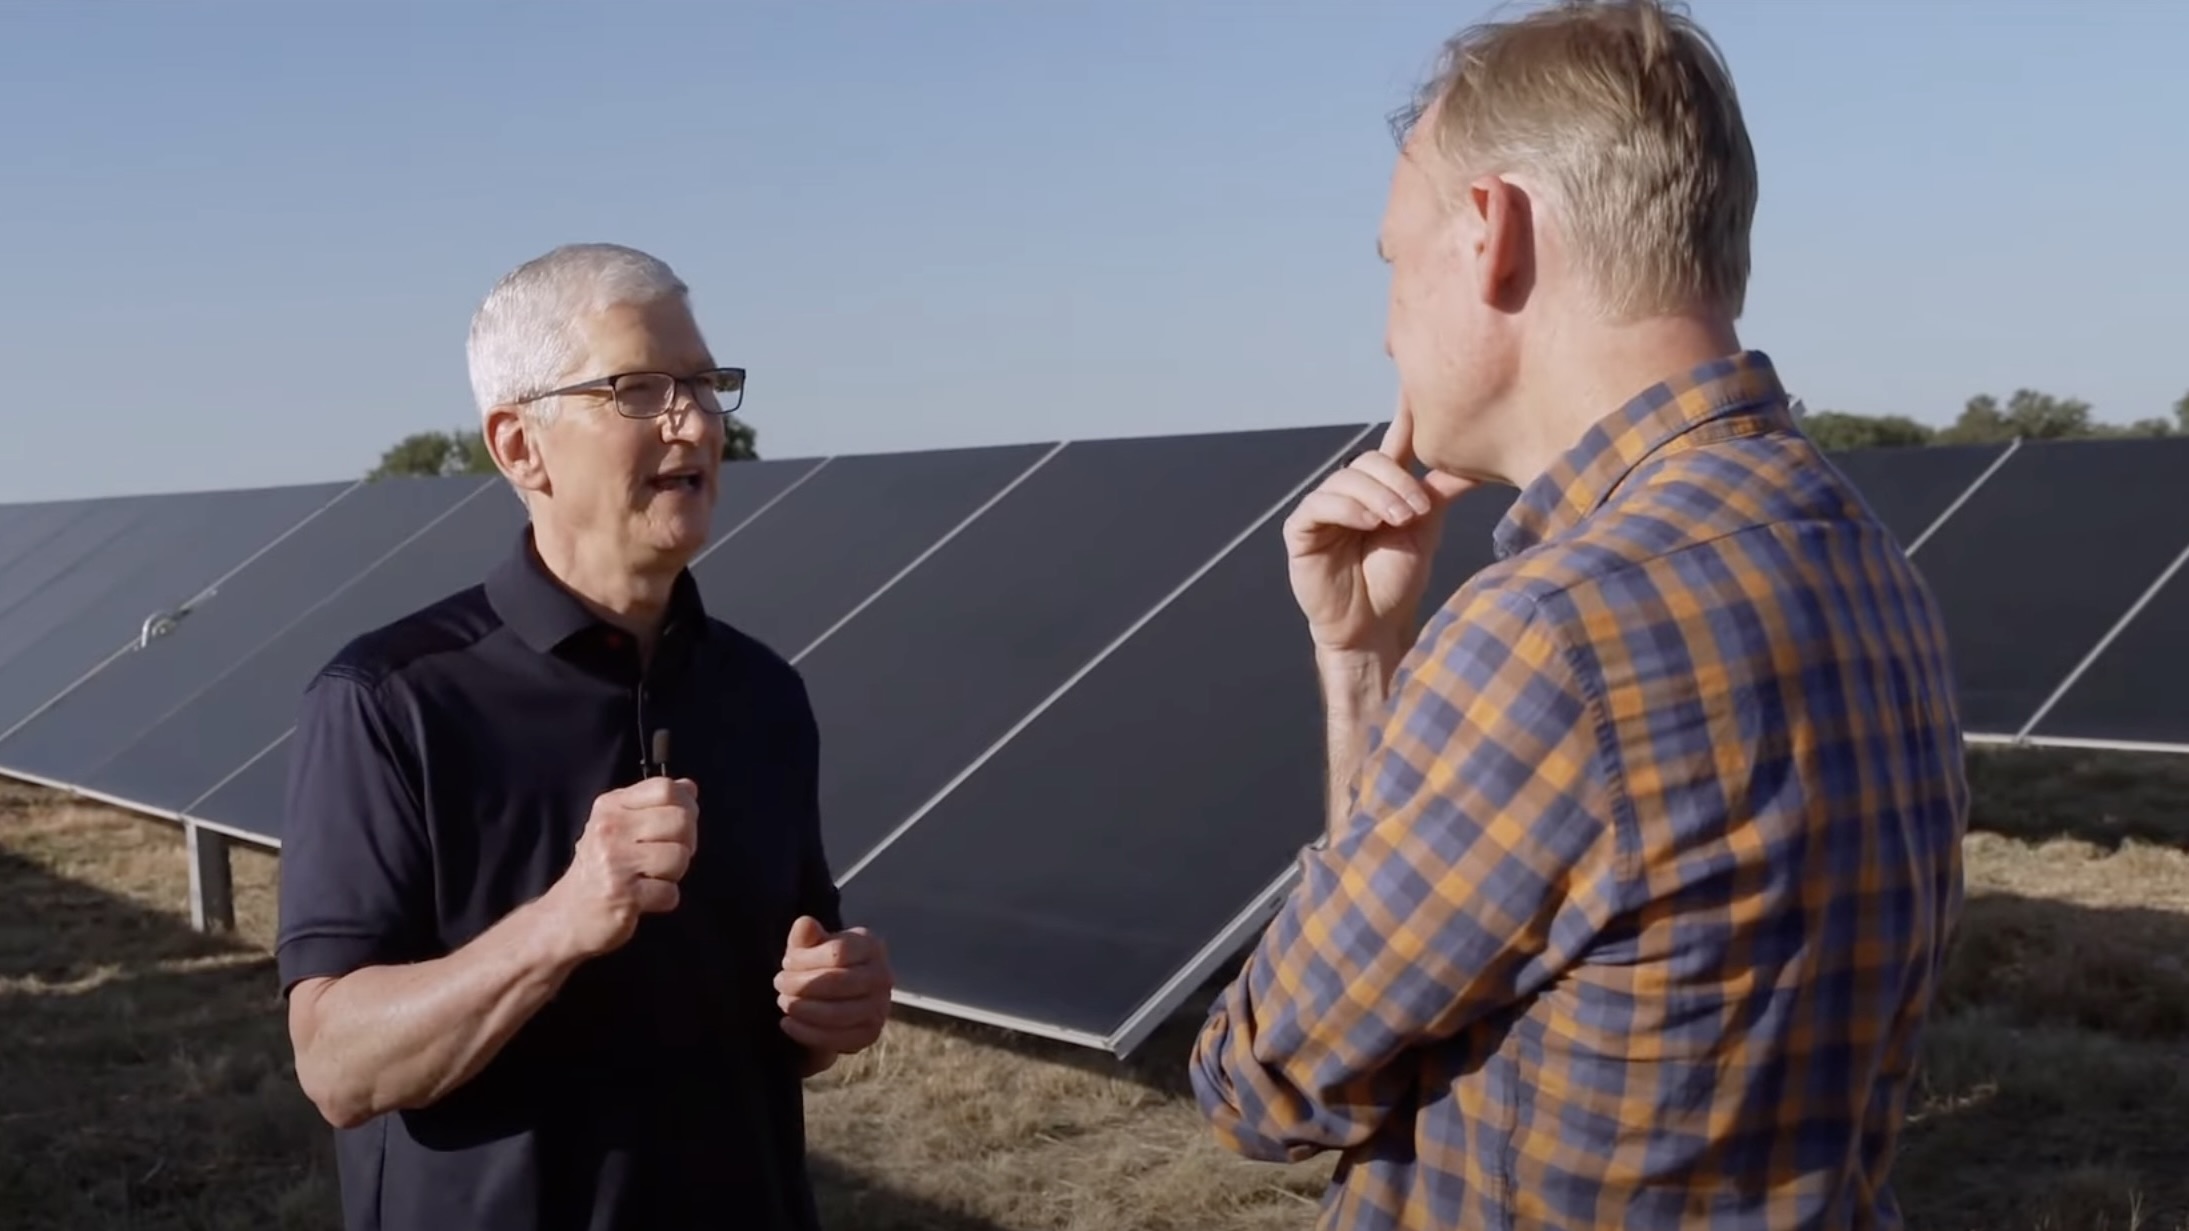 Tim Cook on why Apple still uses Twitter: ‘It’s there for discourse and as a town square’